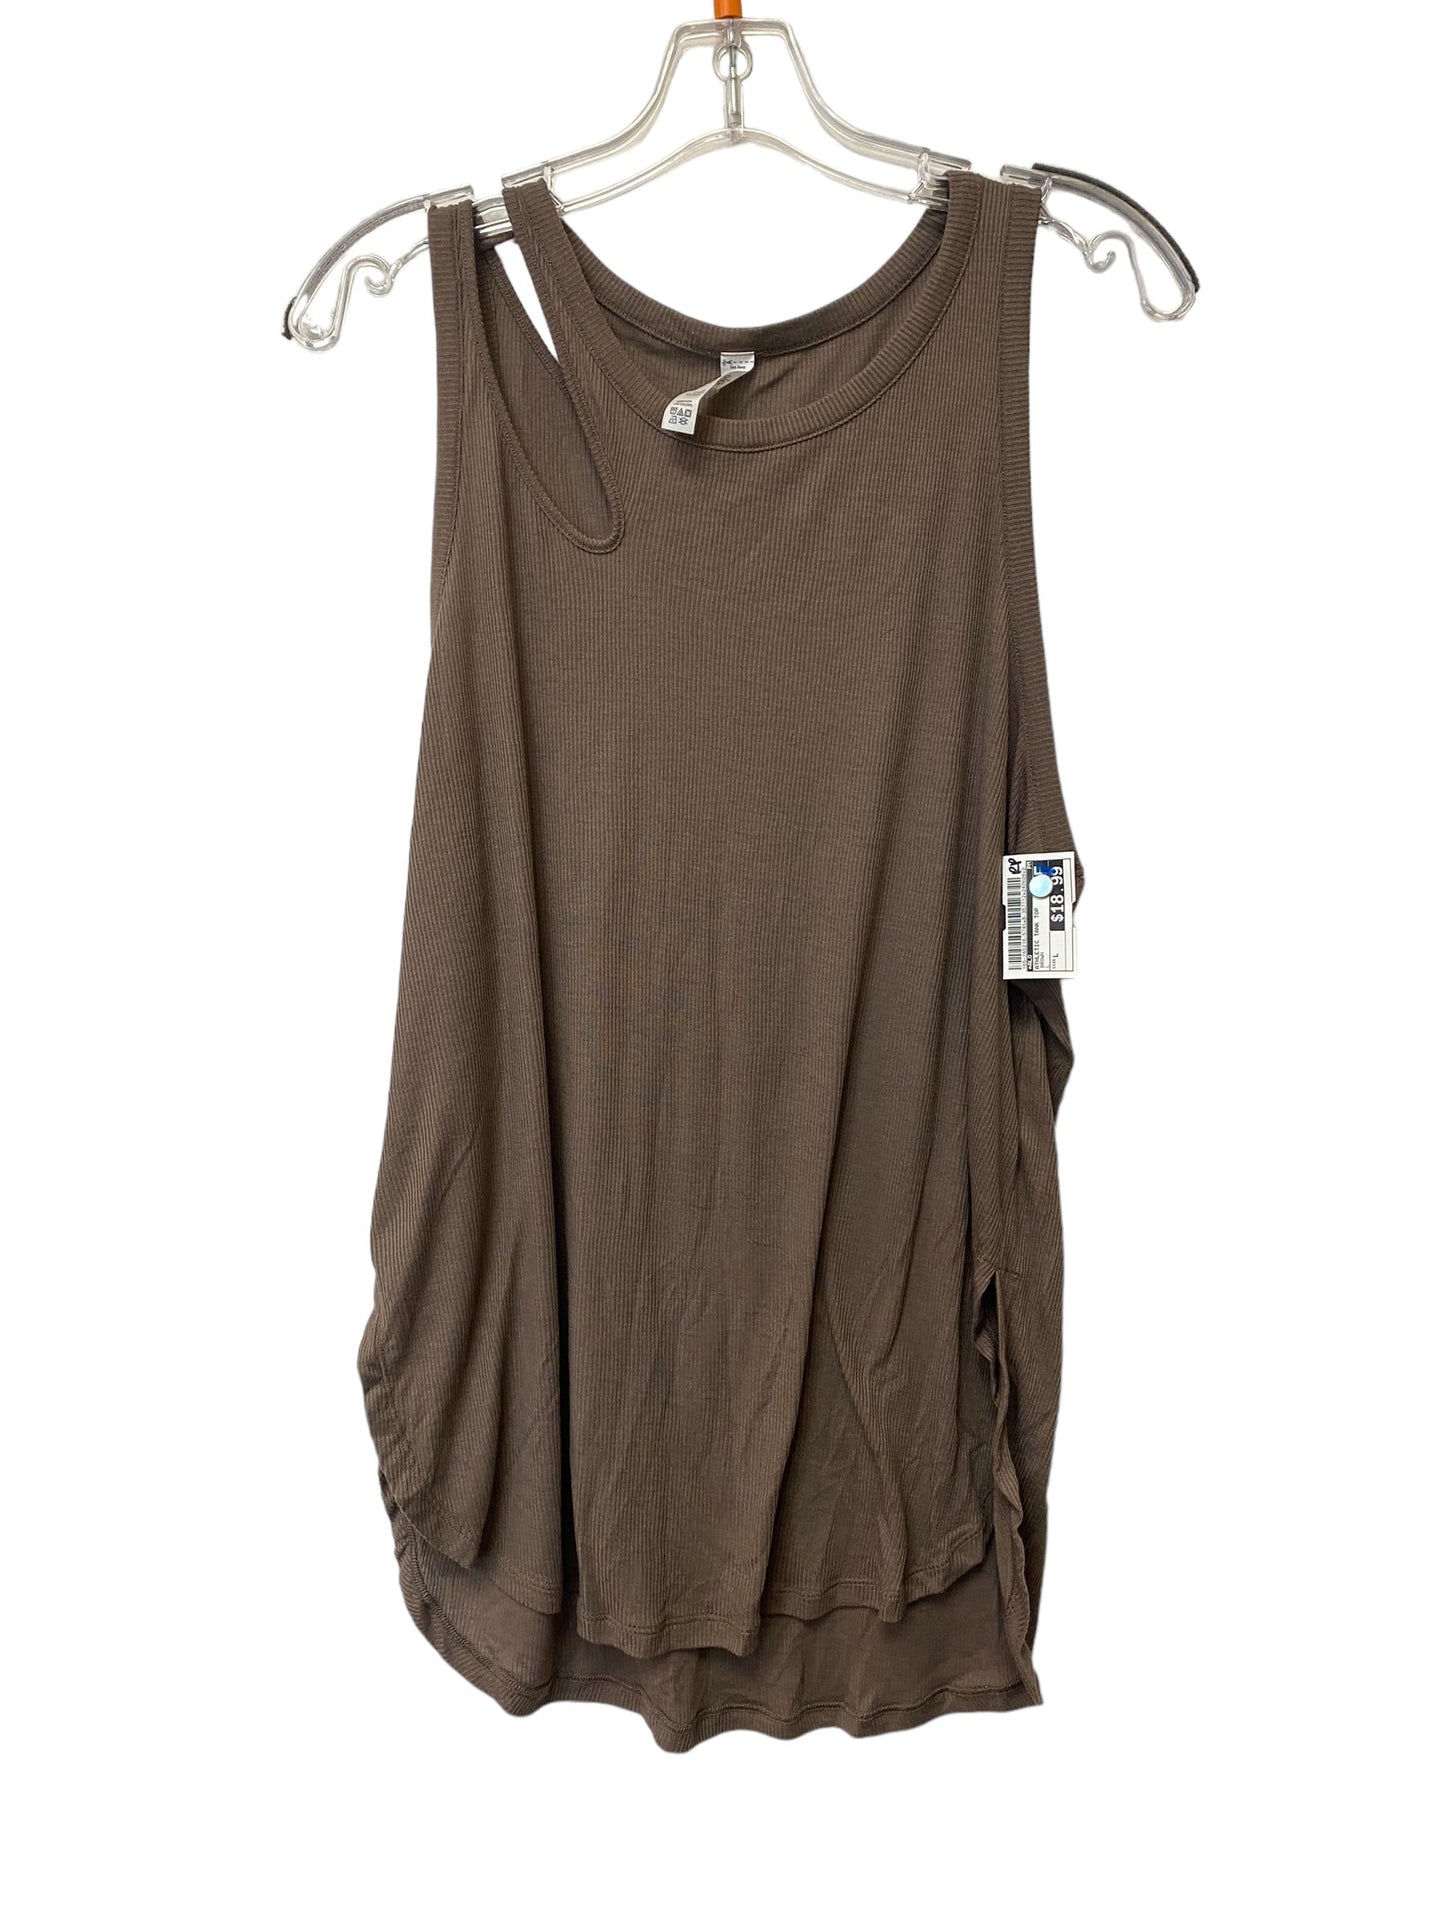 Brown Athletic Tank Top Alo, Size L